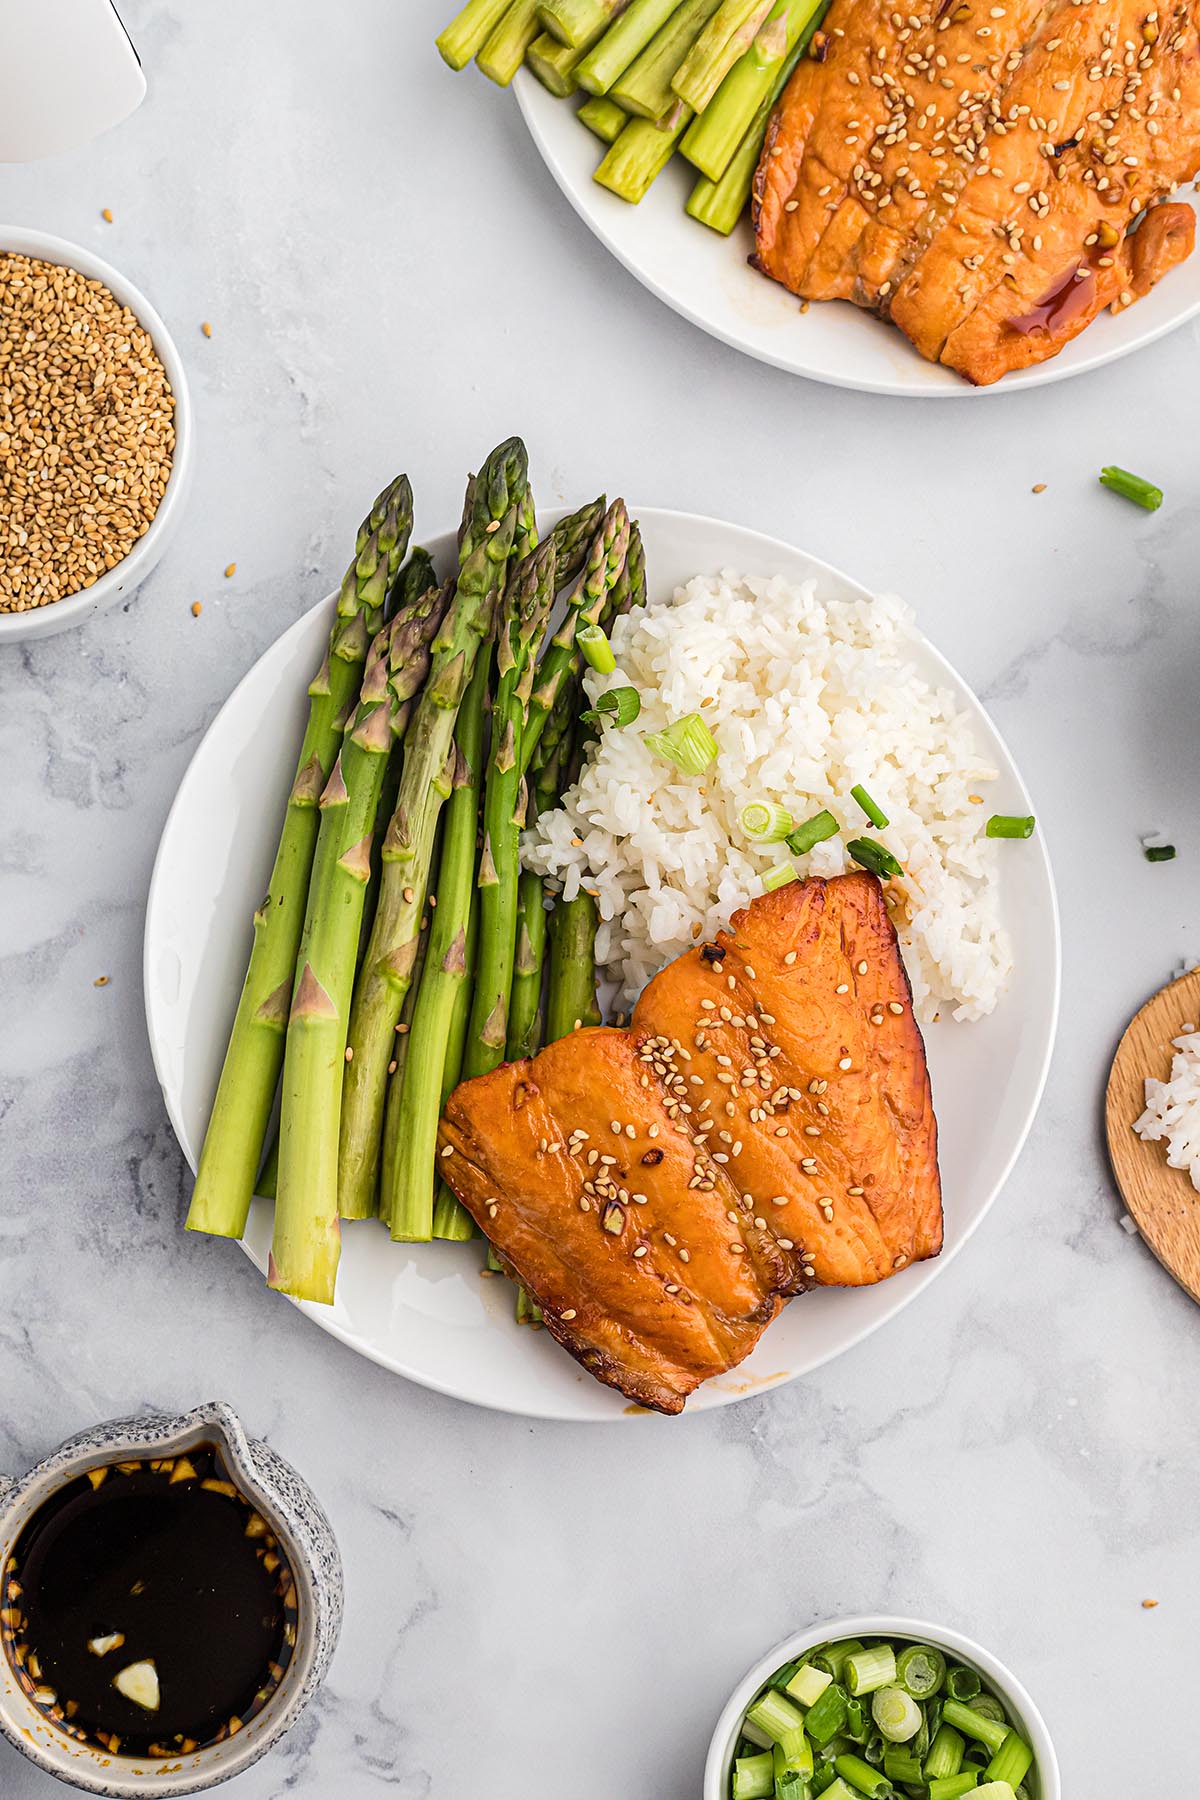 Overhead view of rice, salmon, and asparagus on a white plate.